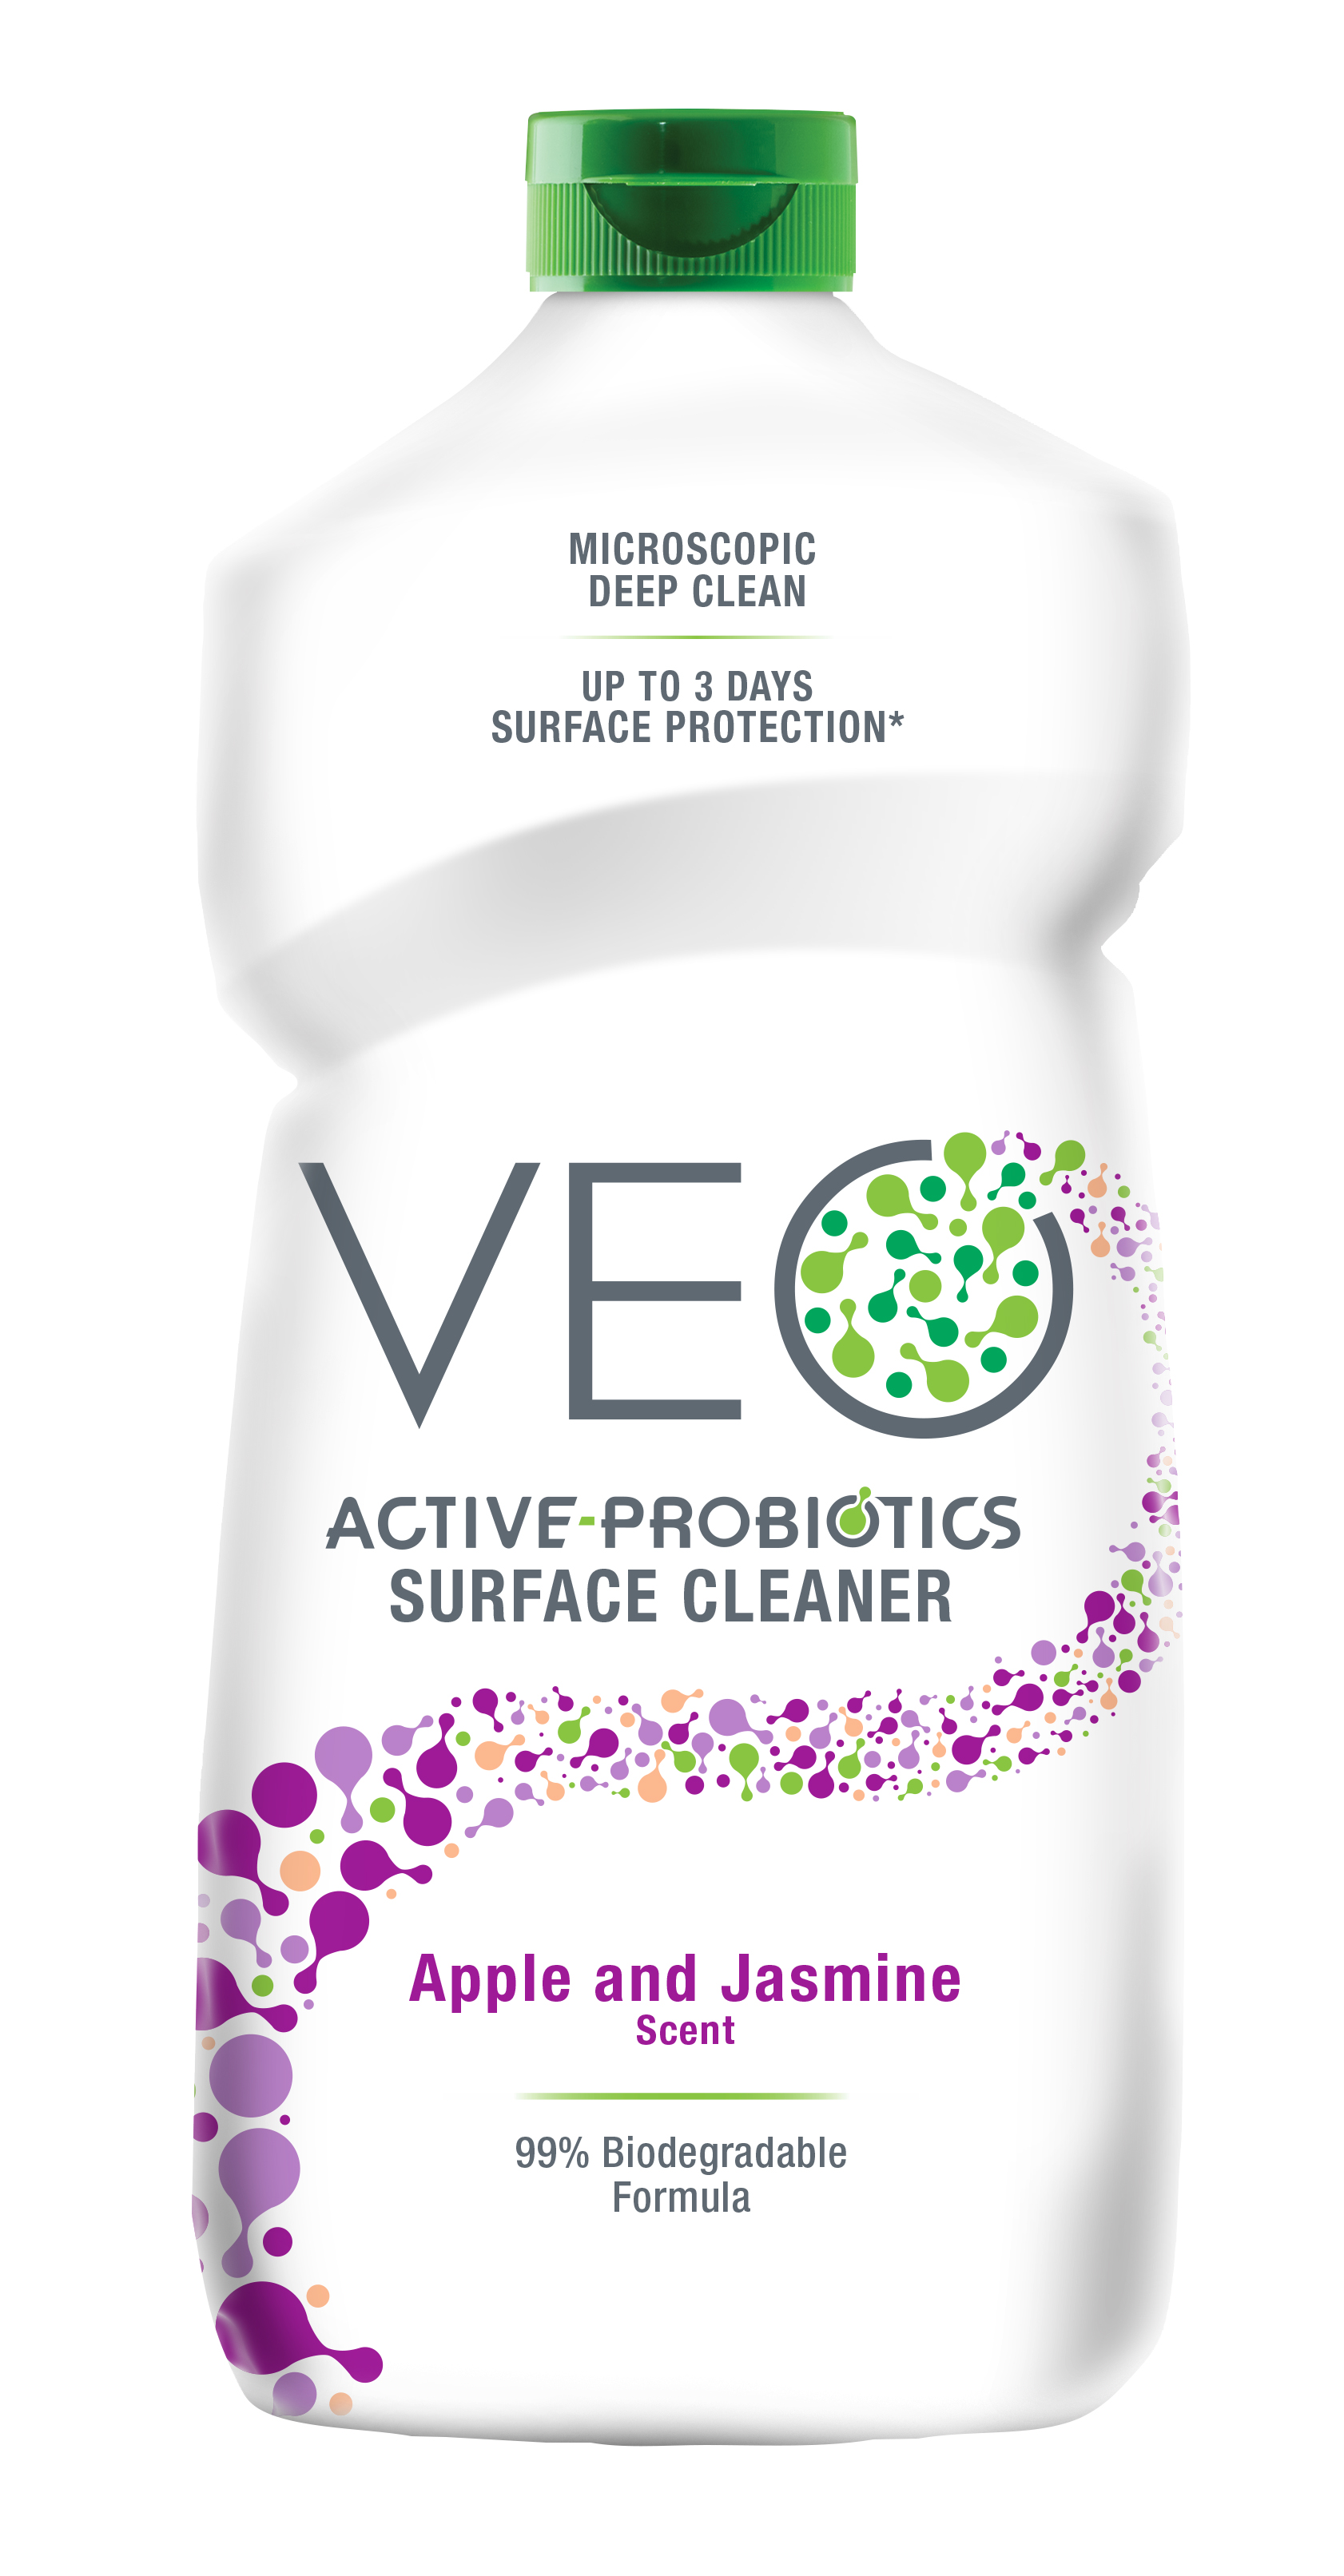 Veo Active-Probiotics Surface Cleaner - Apple and Jasmine Scent (Discontinued)